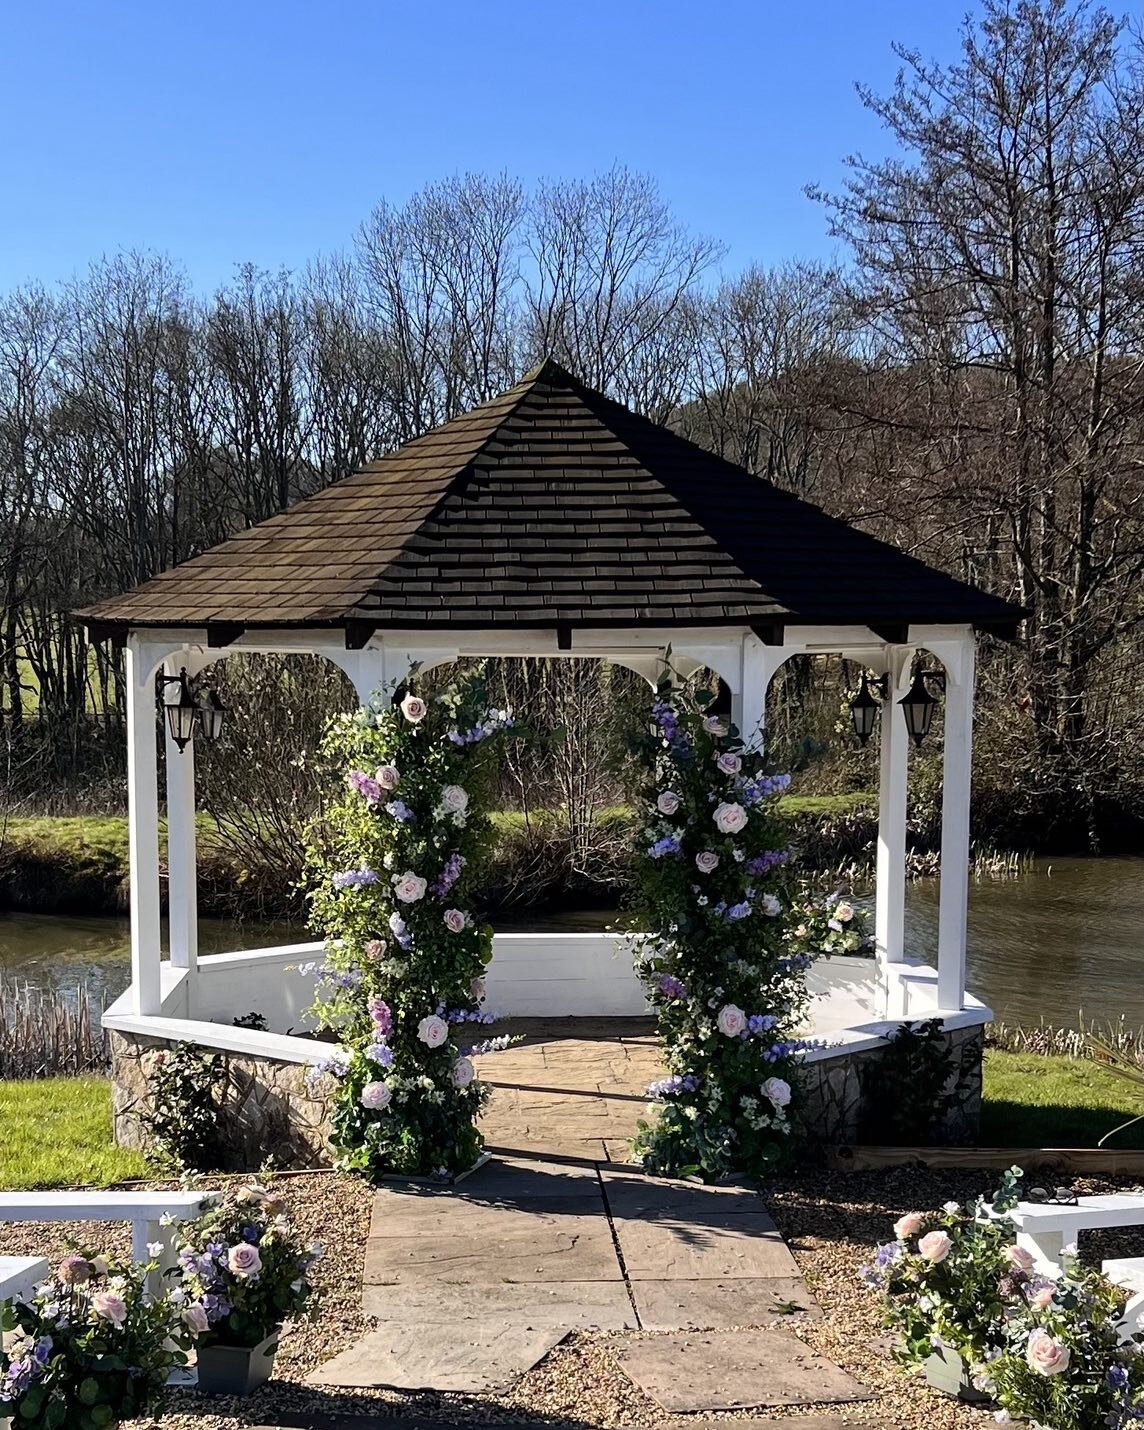 Our first outdoor wedding ceremony of the season! So thrilled that the sun came out to celebrate Aimee and Sam&rdquo;s special day. Congratulations to you both!

#weddingflowerssurrey #fauxweddingflowers #fauxflowers #guildfordwedding #weddinggazebo 